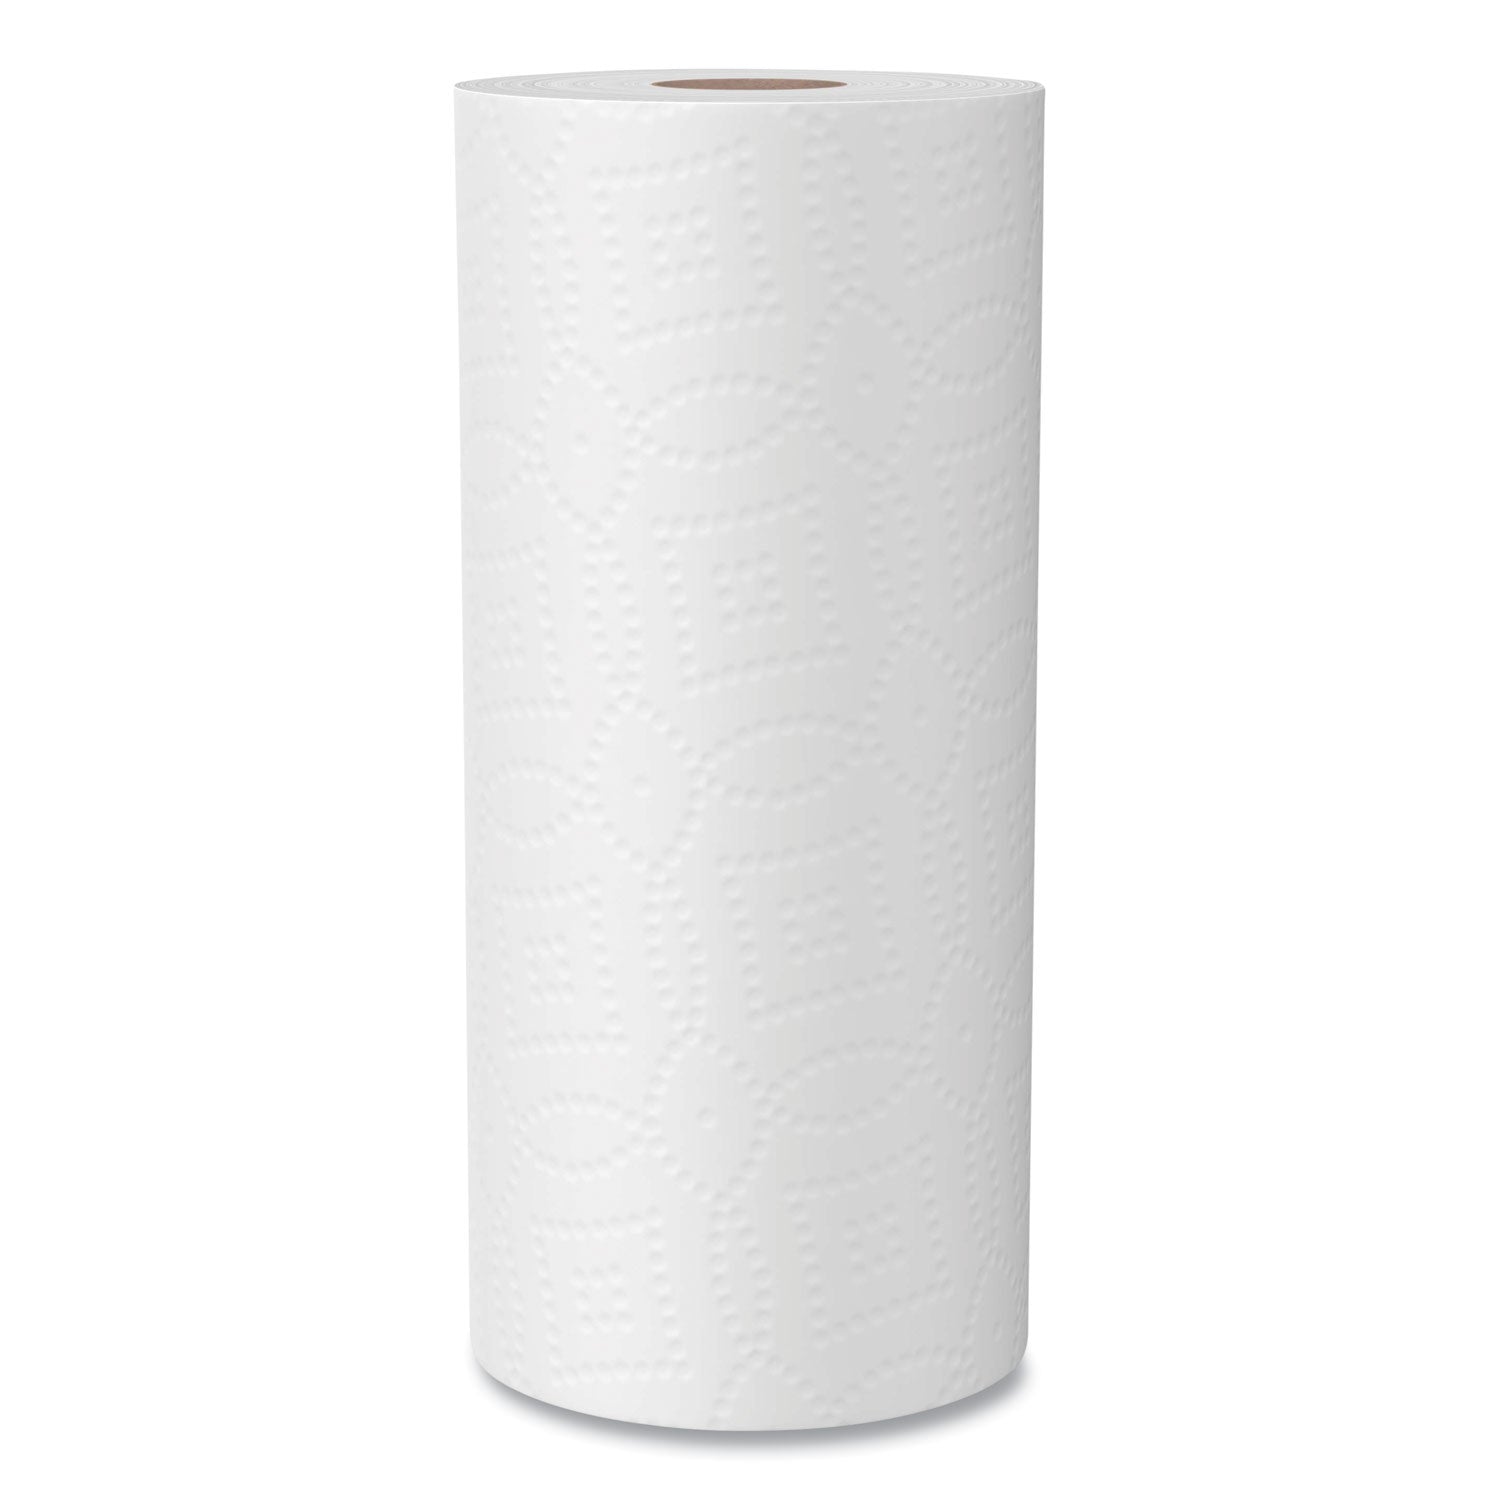 100% Recycled Paper Kitchen Towel Rolls, 2-Ply, 11 x 5.4, 156 Sheets/Roll, 8 Rolls/Pack - 